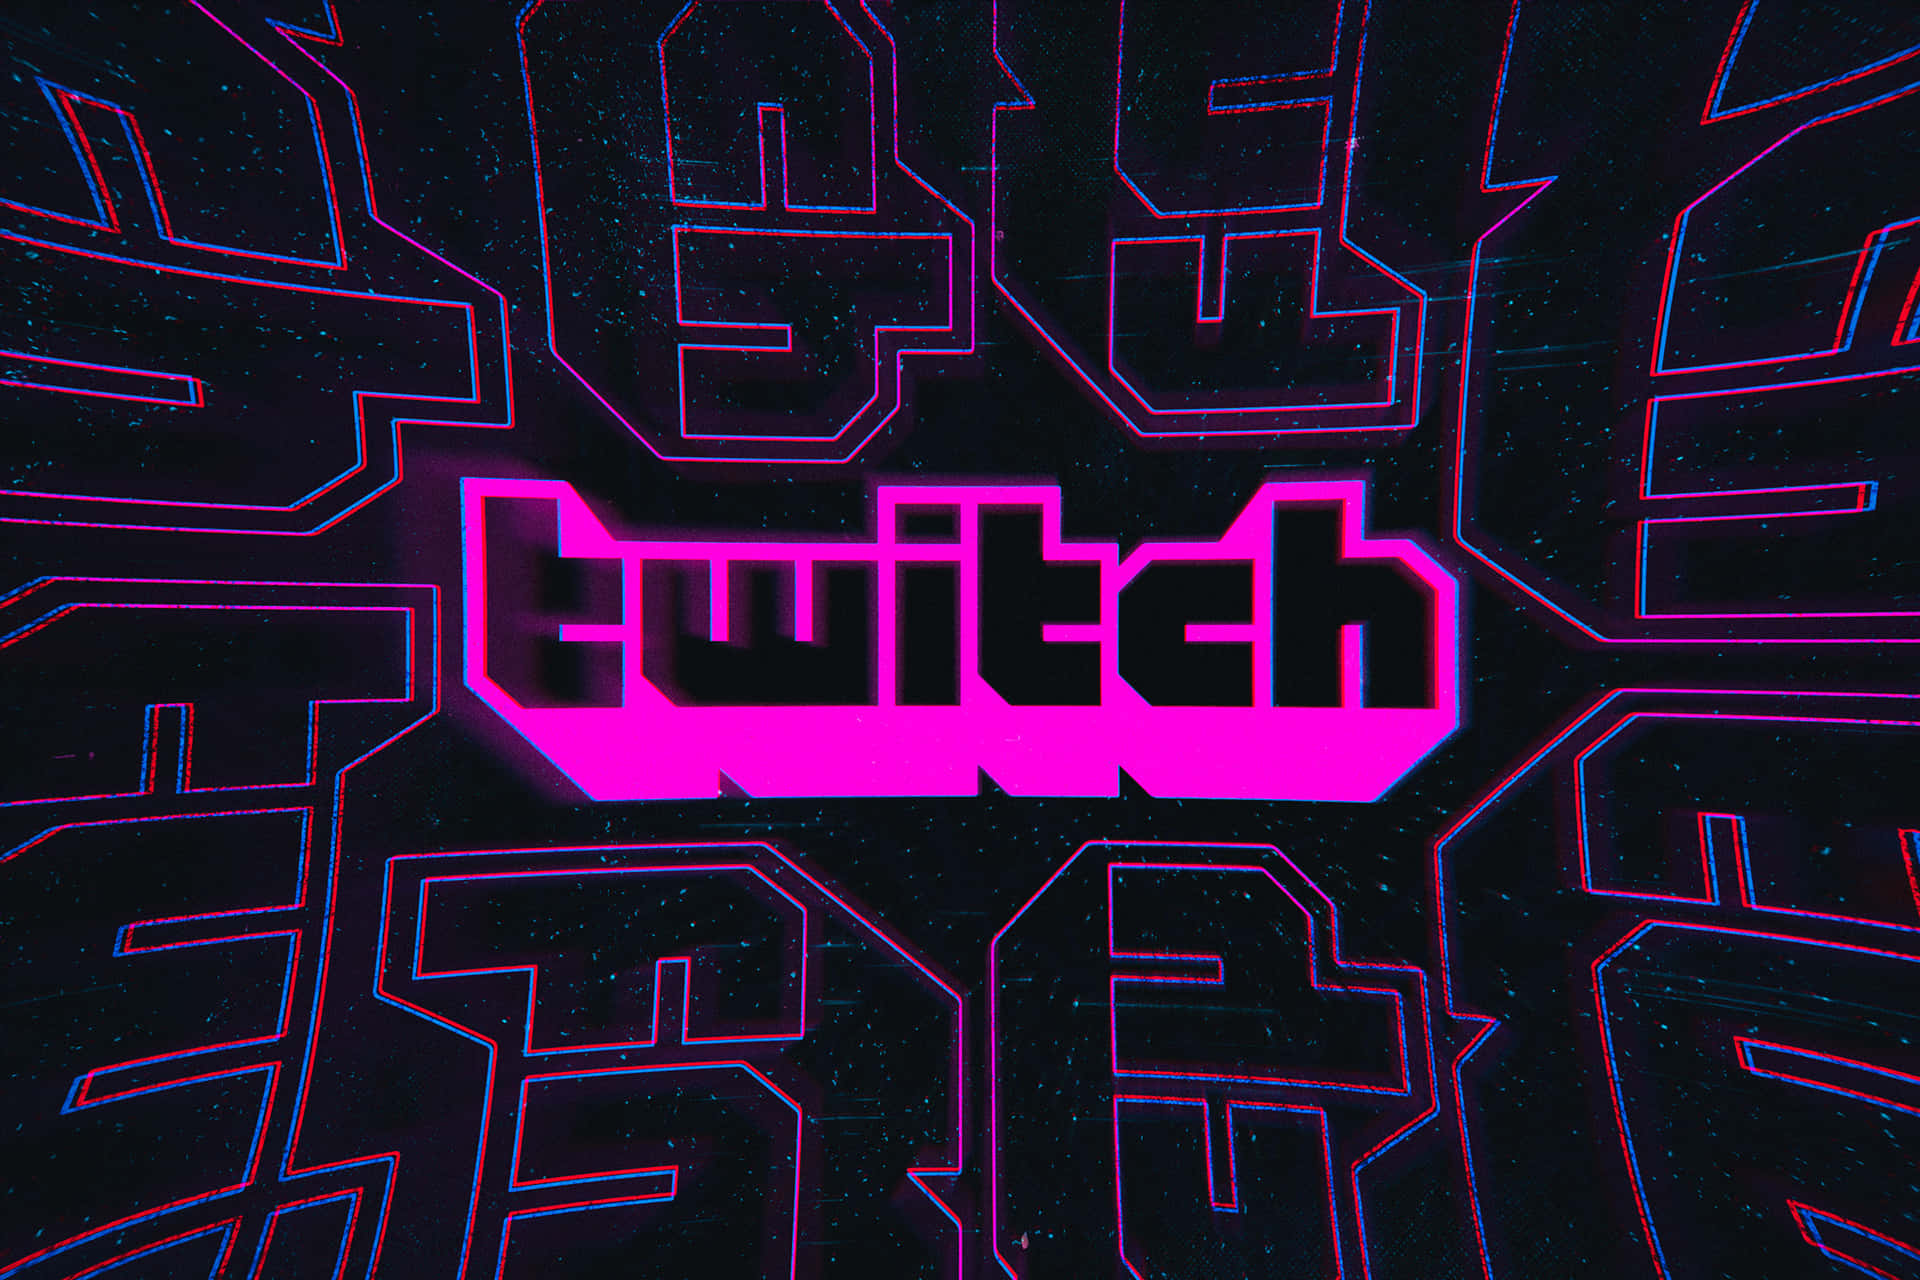 Join a growing community of gamers streaming on Twitch